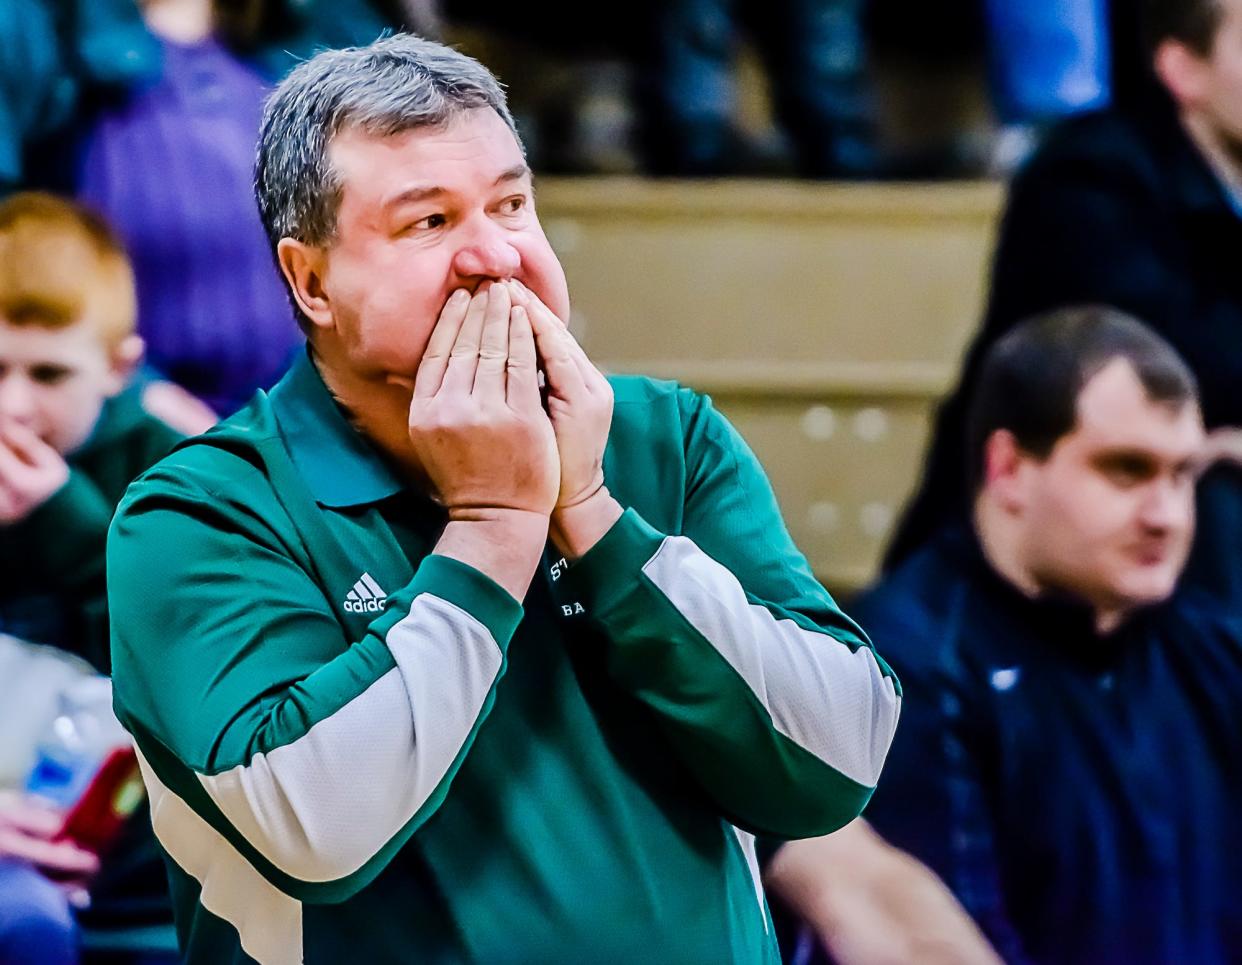 Portland St. Patrick's Girls Basketball Head Coach Al Schrauben reacts after a foul is called on one of his players late in the 1st half of the Shamrocks' game with Laingsburg.